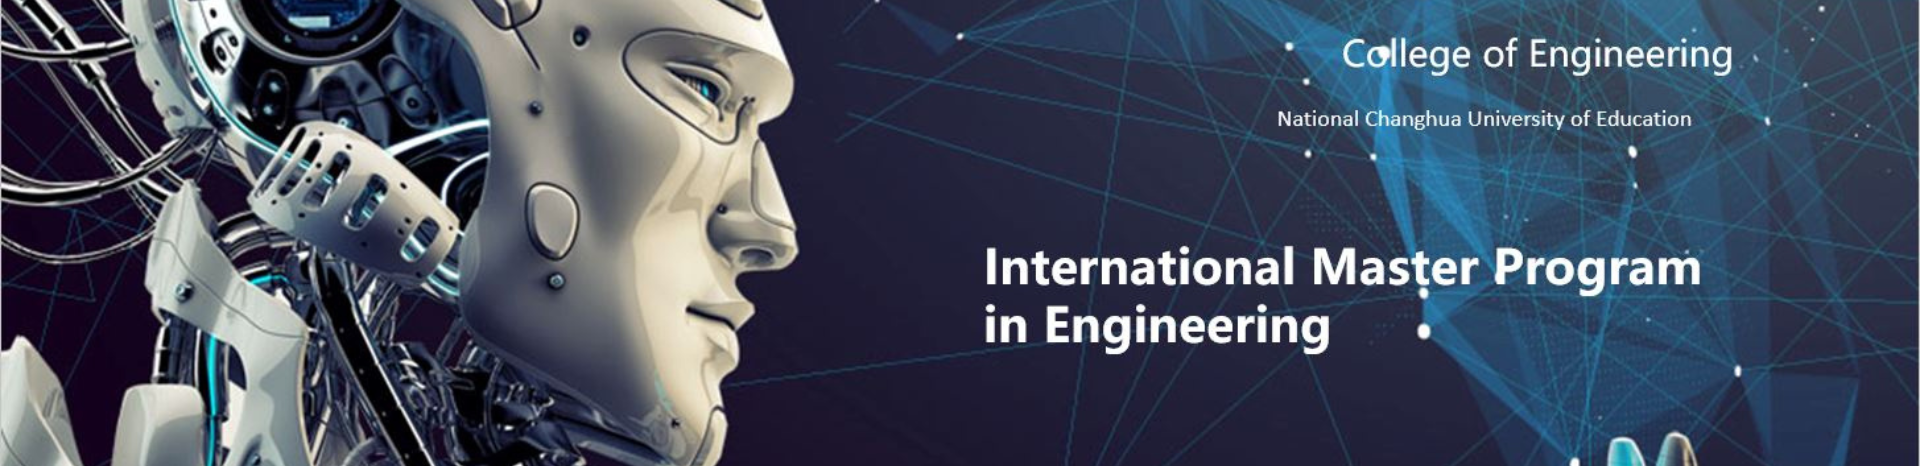 NCUE to Launch International Master Program in Engineering in Fall 2022